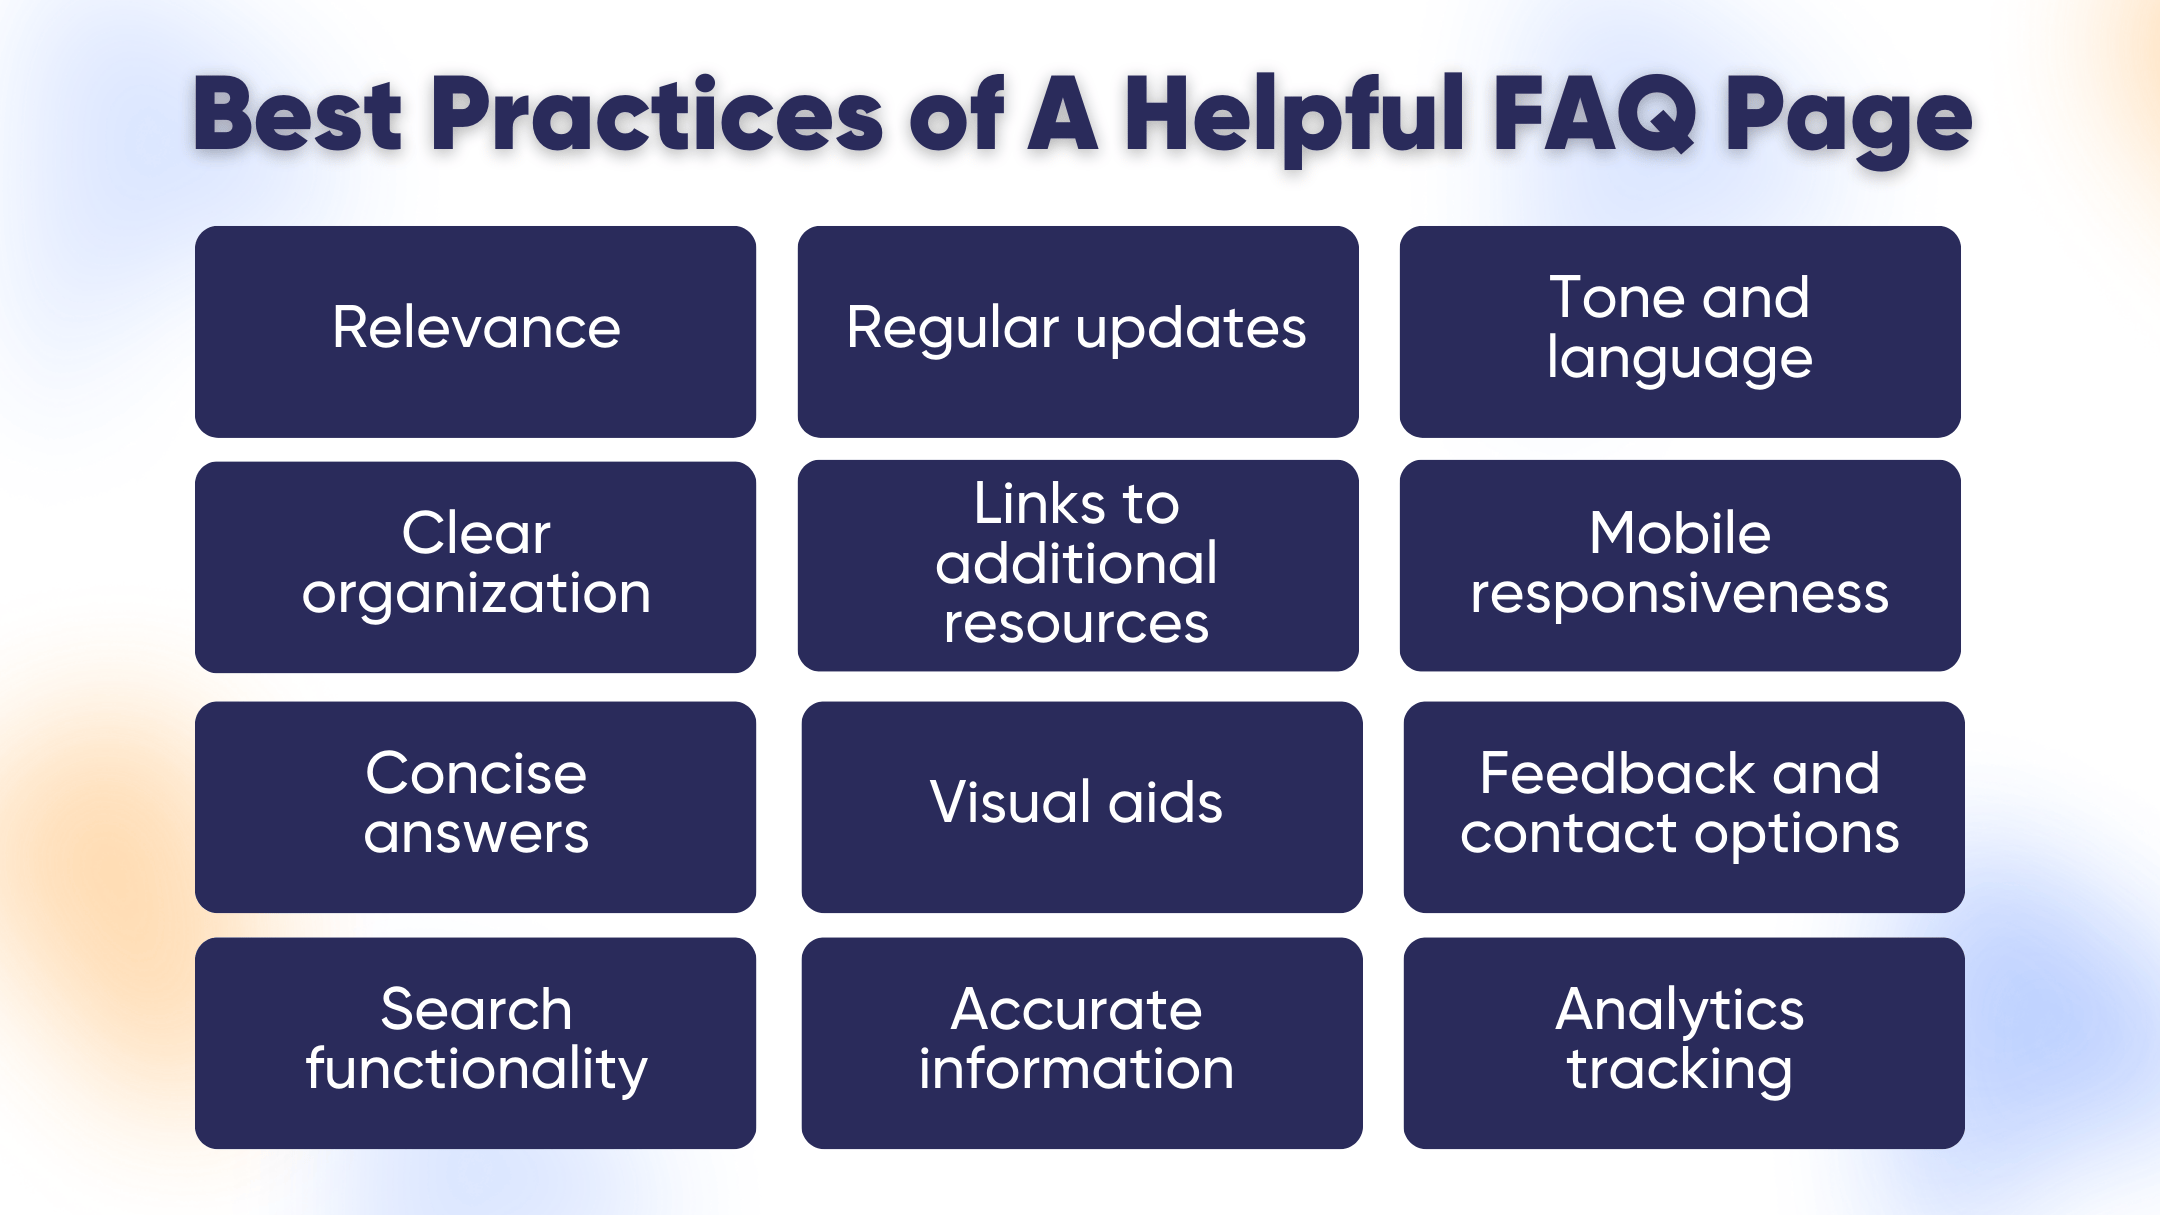 Best Practices of A Helpful FAQ Page